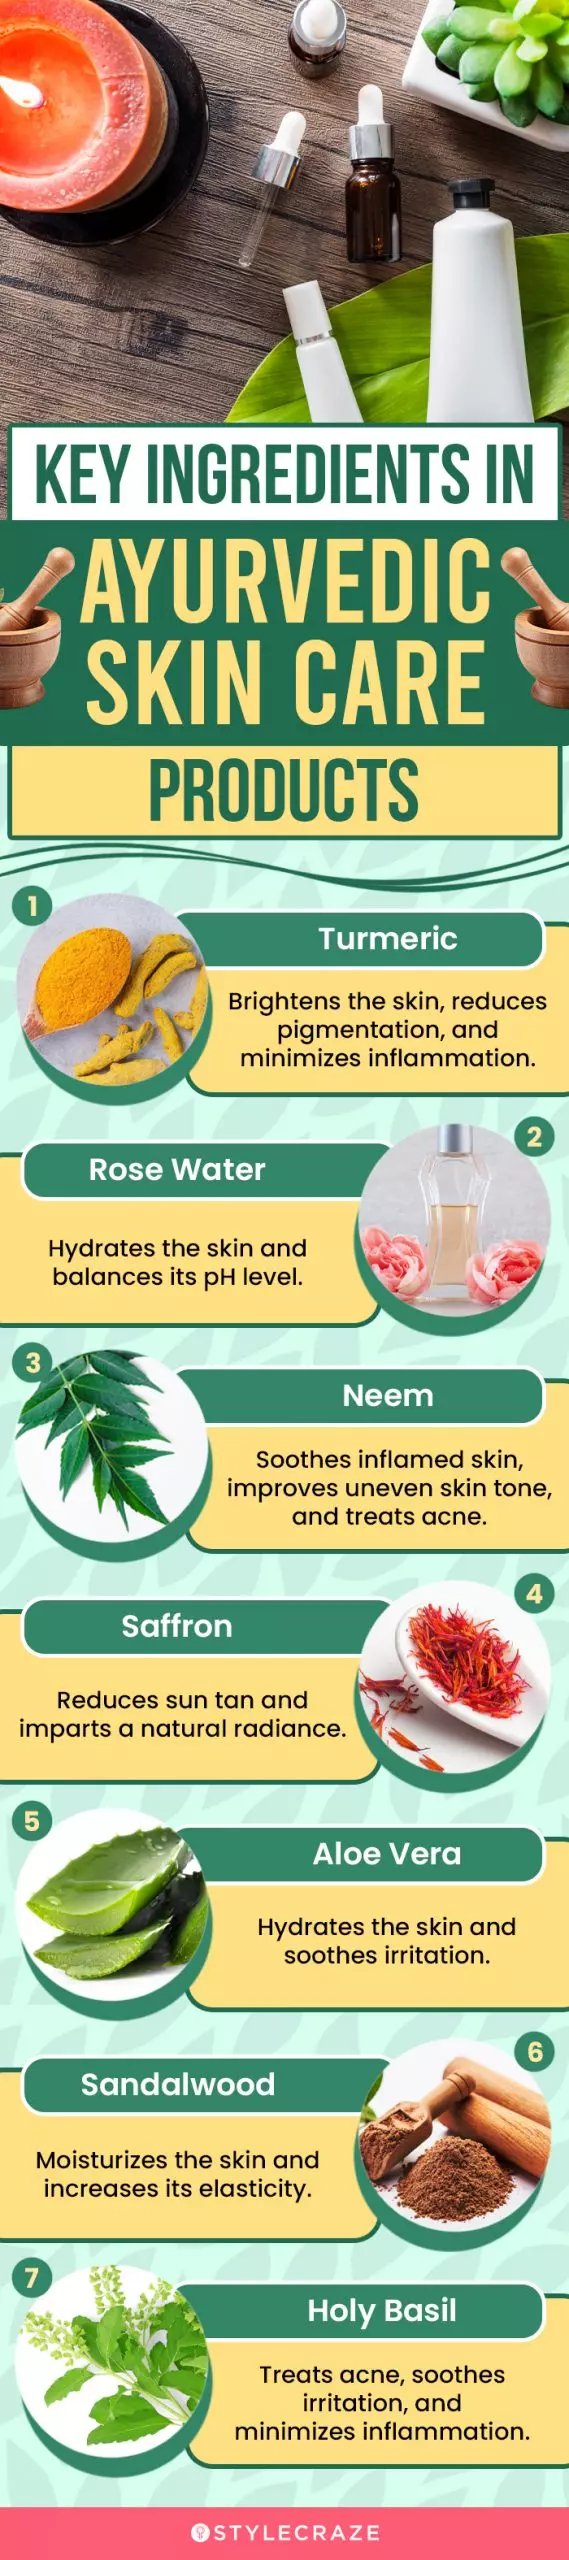 Key Ingredients In Ayurvedic Skin Care Products (infographic)